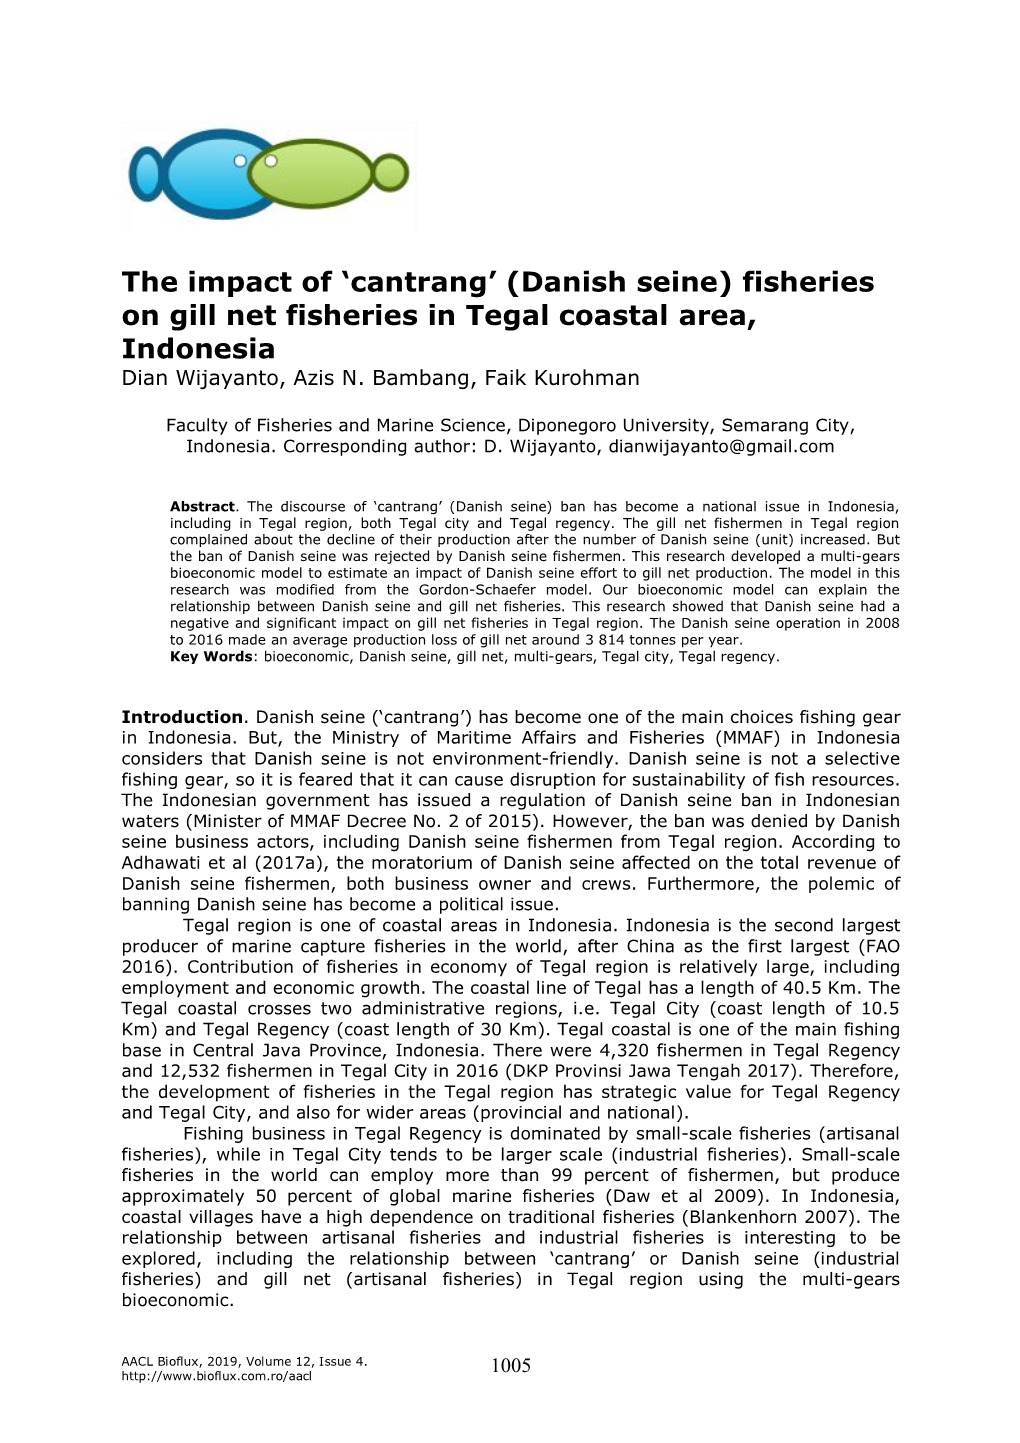 The Impact of 'Cantrang' (Danish Seine) Fisheries on Gill Net Fisheries In